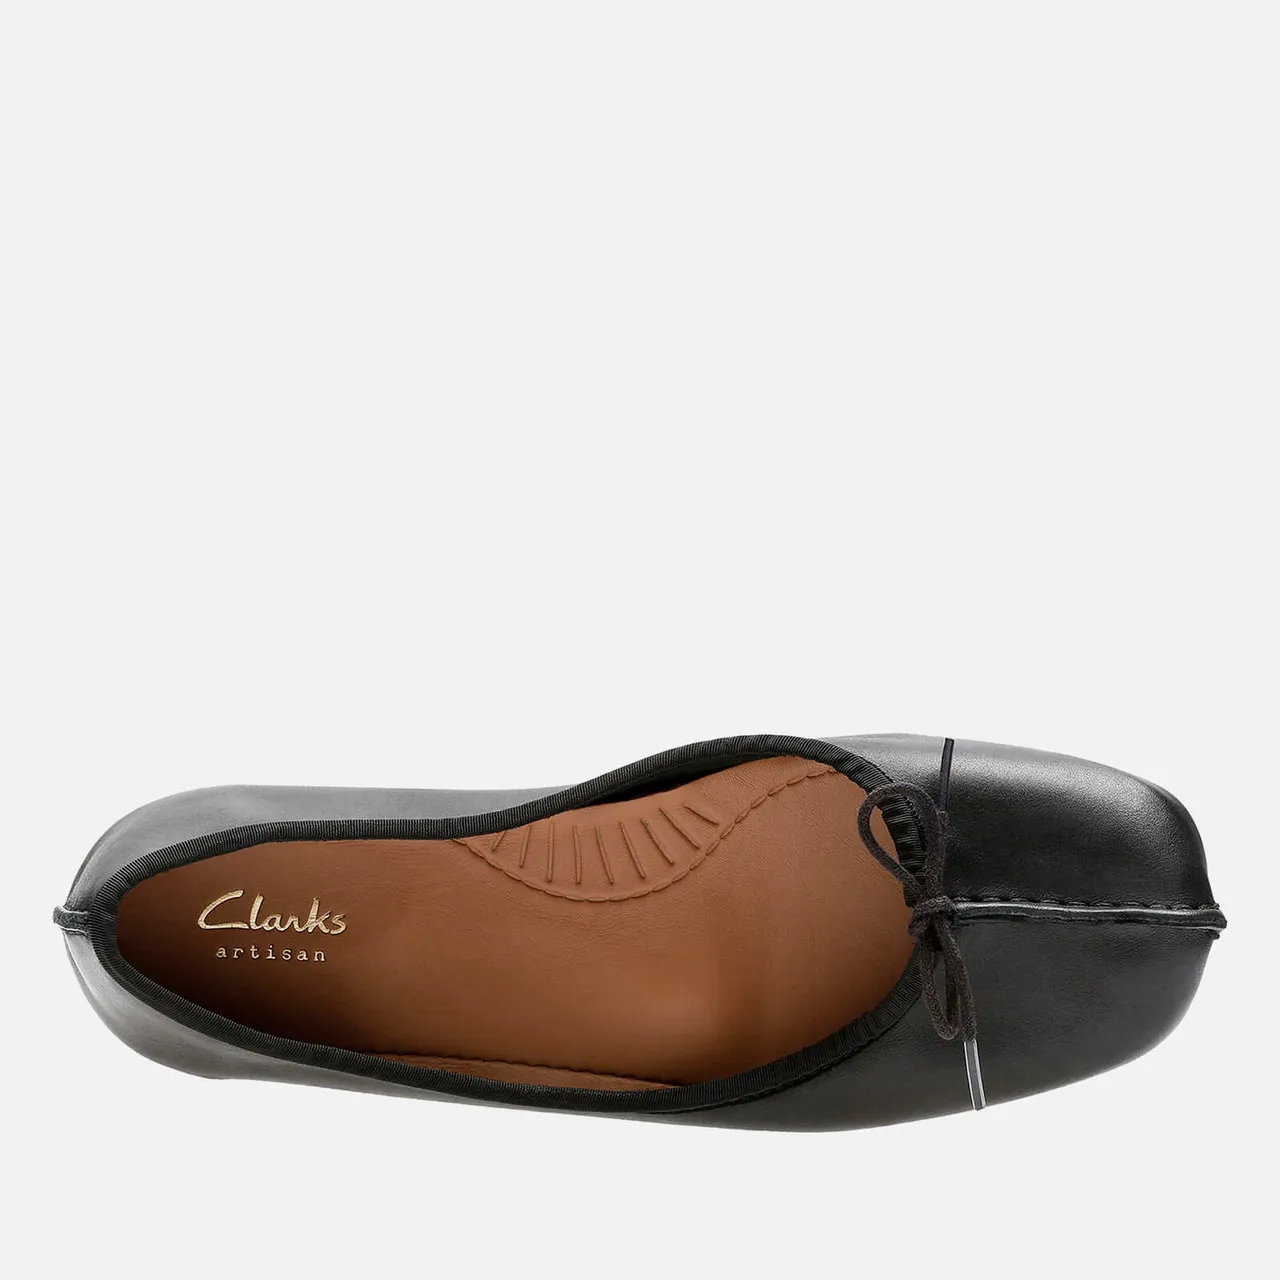 Clarks Women's Freckle Ice Leather Ballet Flats - UK